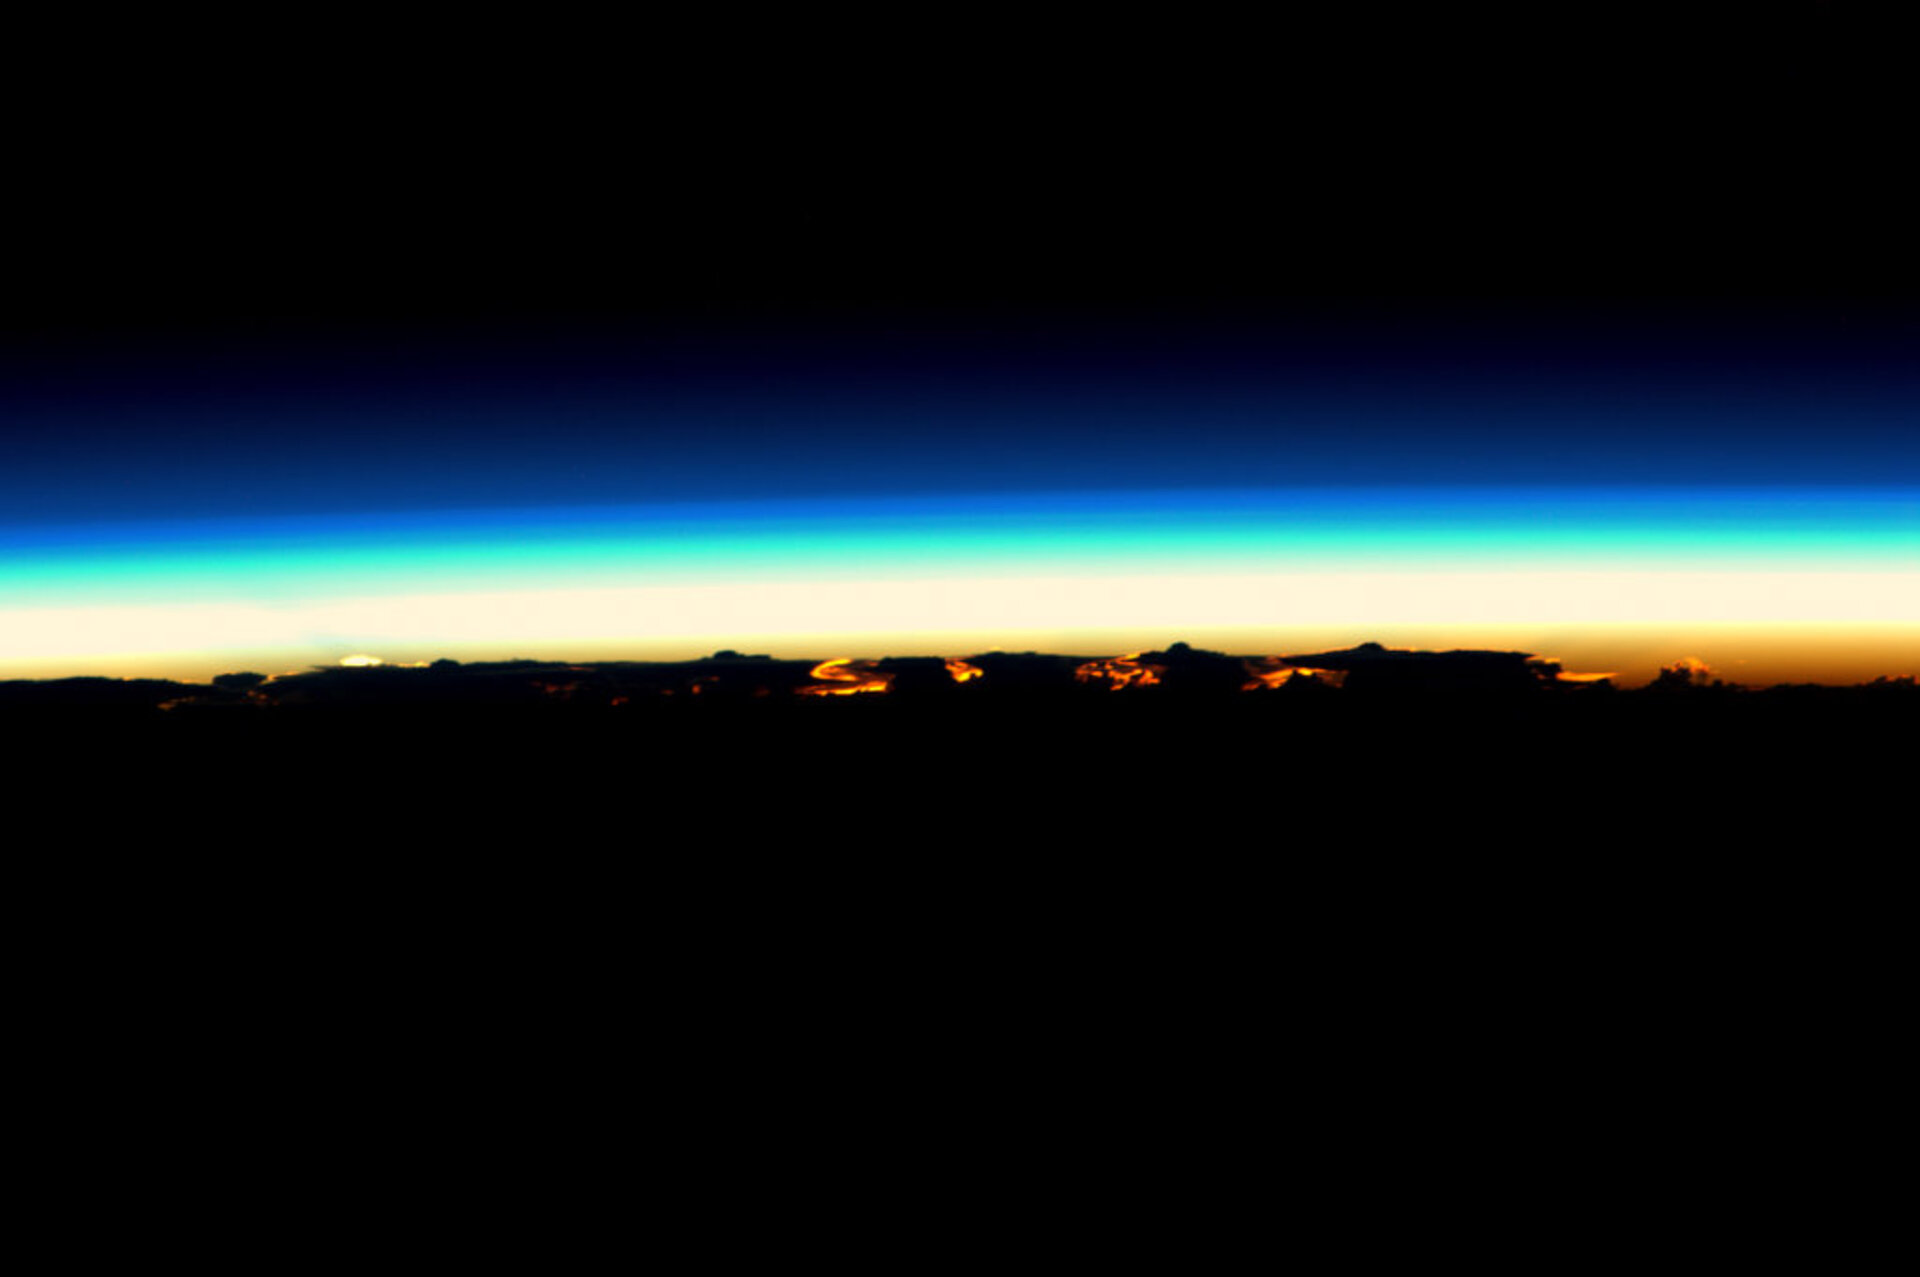 Nightfall from the ISS